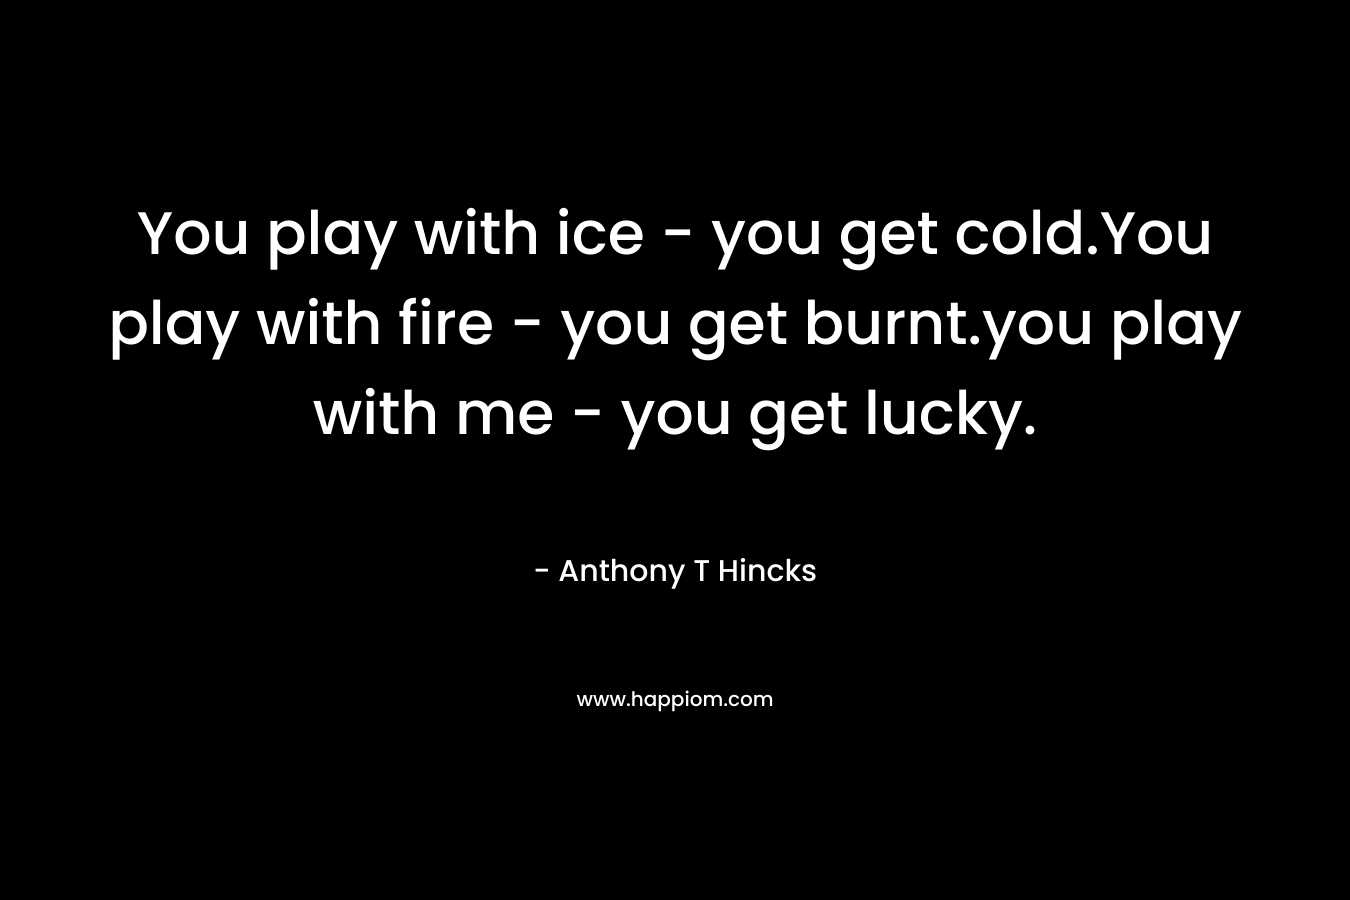 You play with ice - you get cold.You play with fire - you get burnt.you play with me - you get lucky.